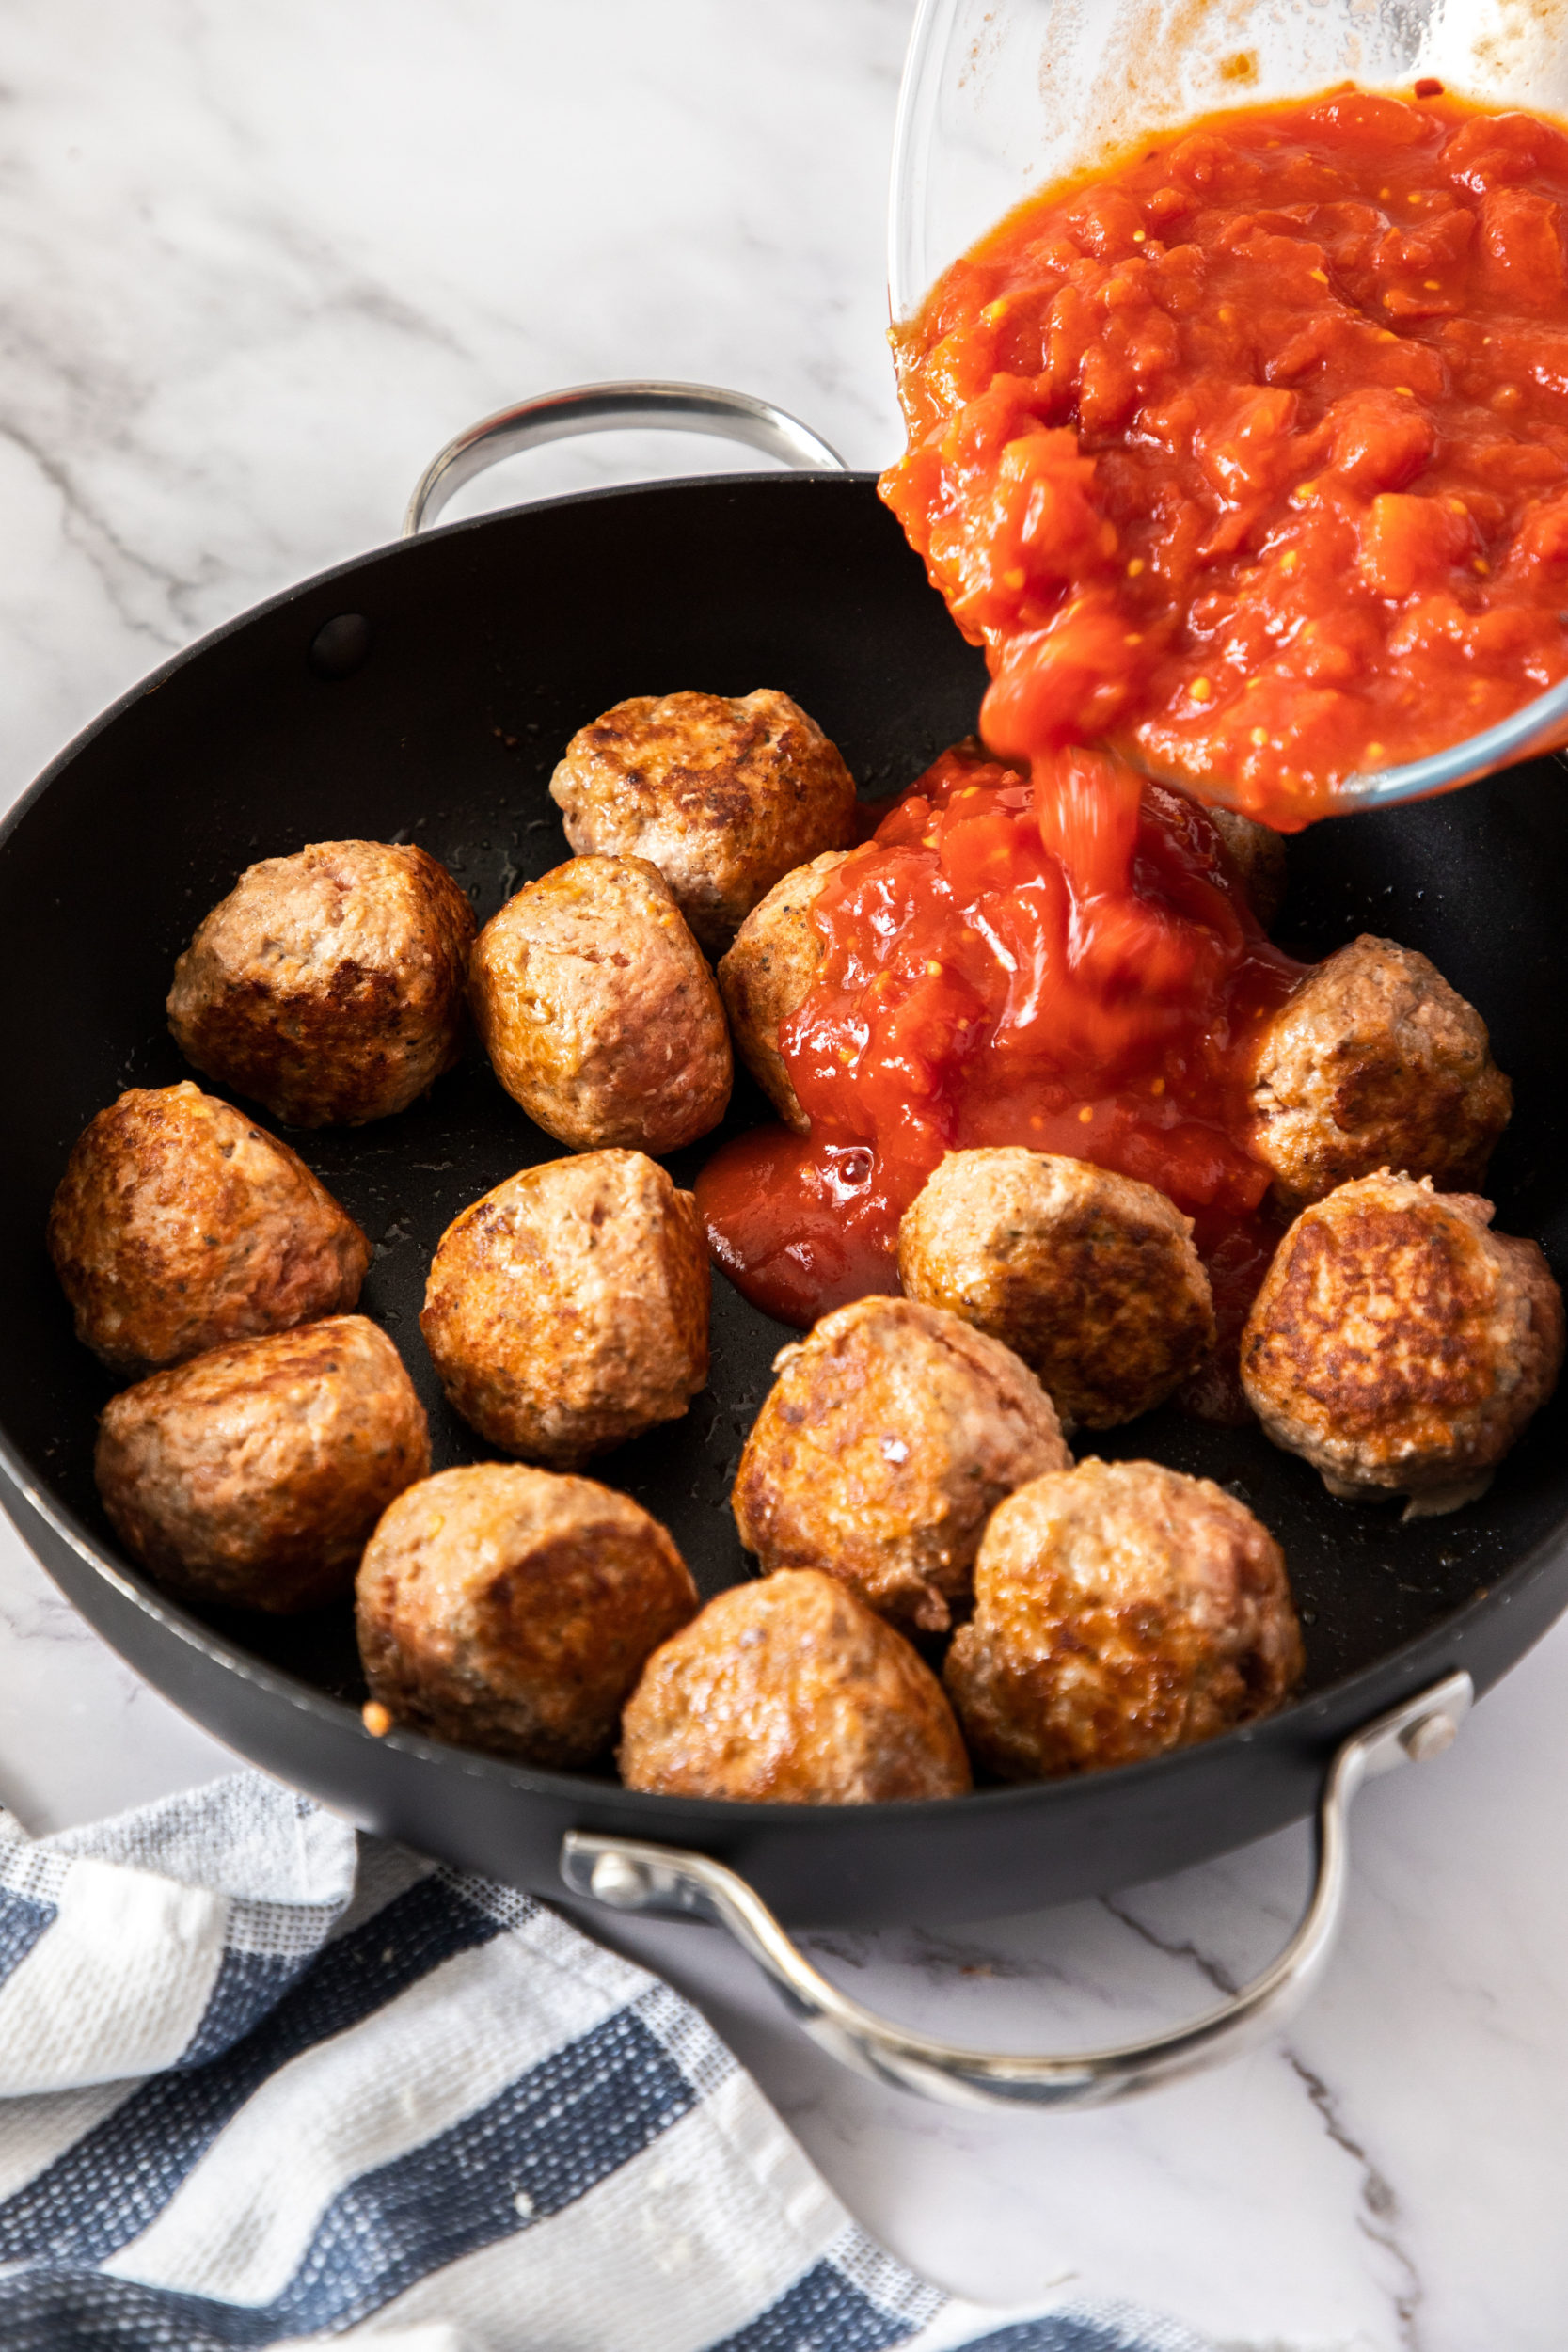 Pouring the tomato sauce in with the meatballs